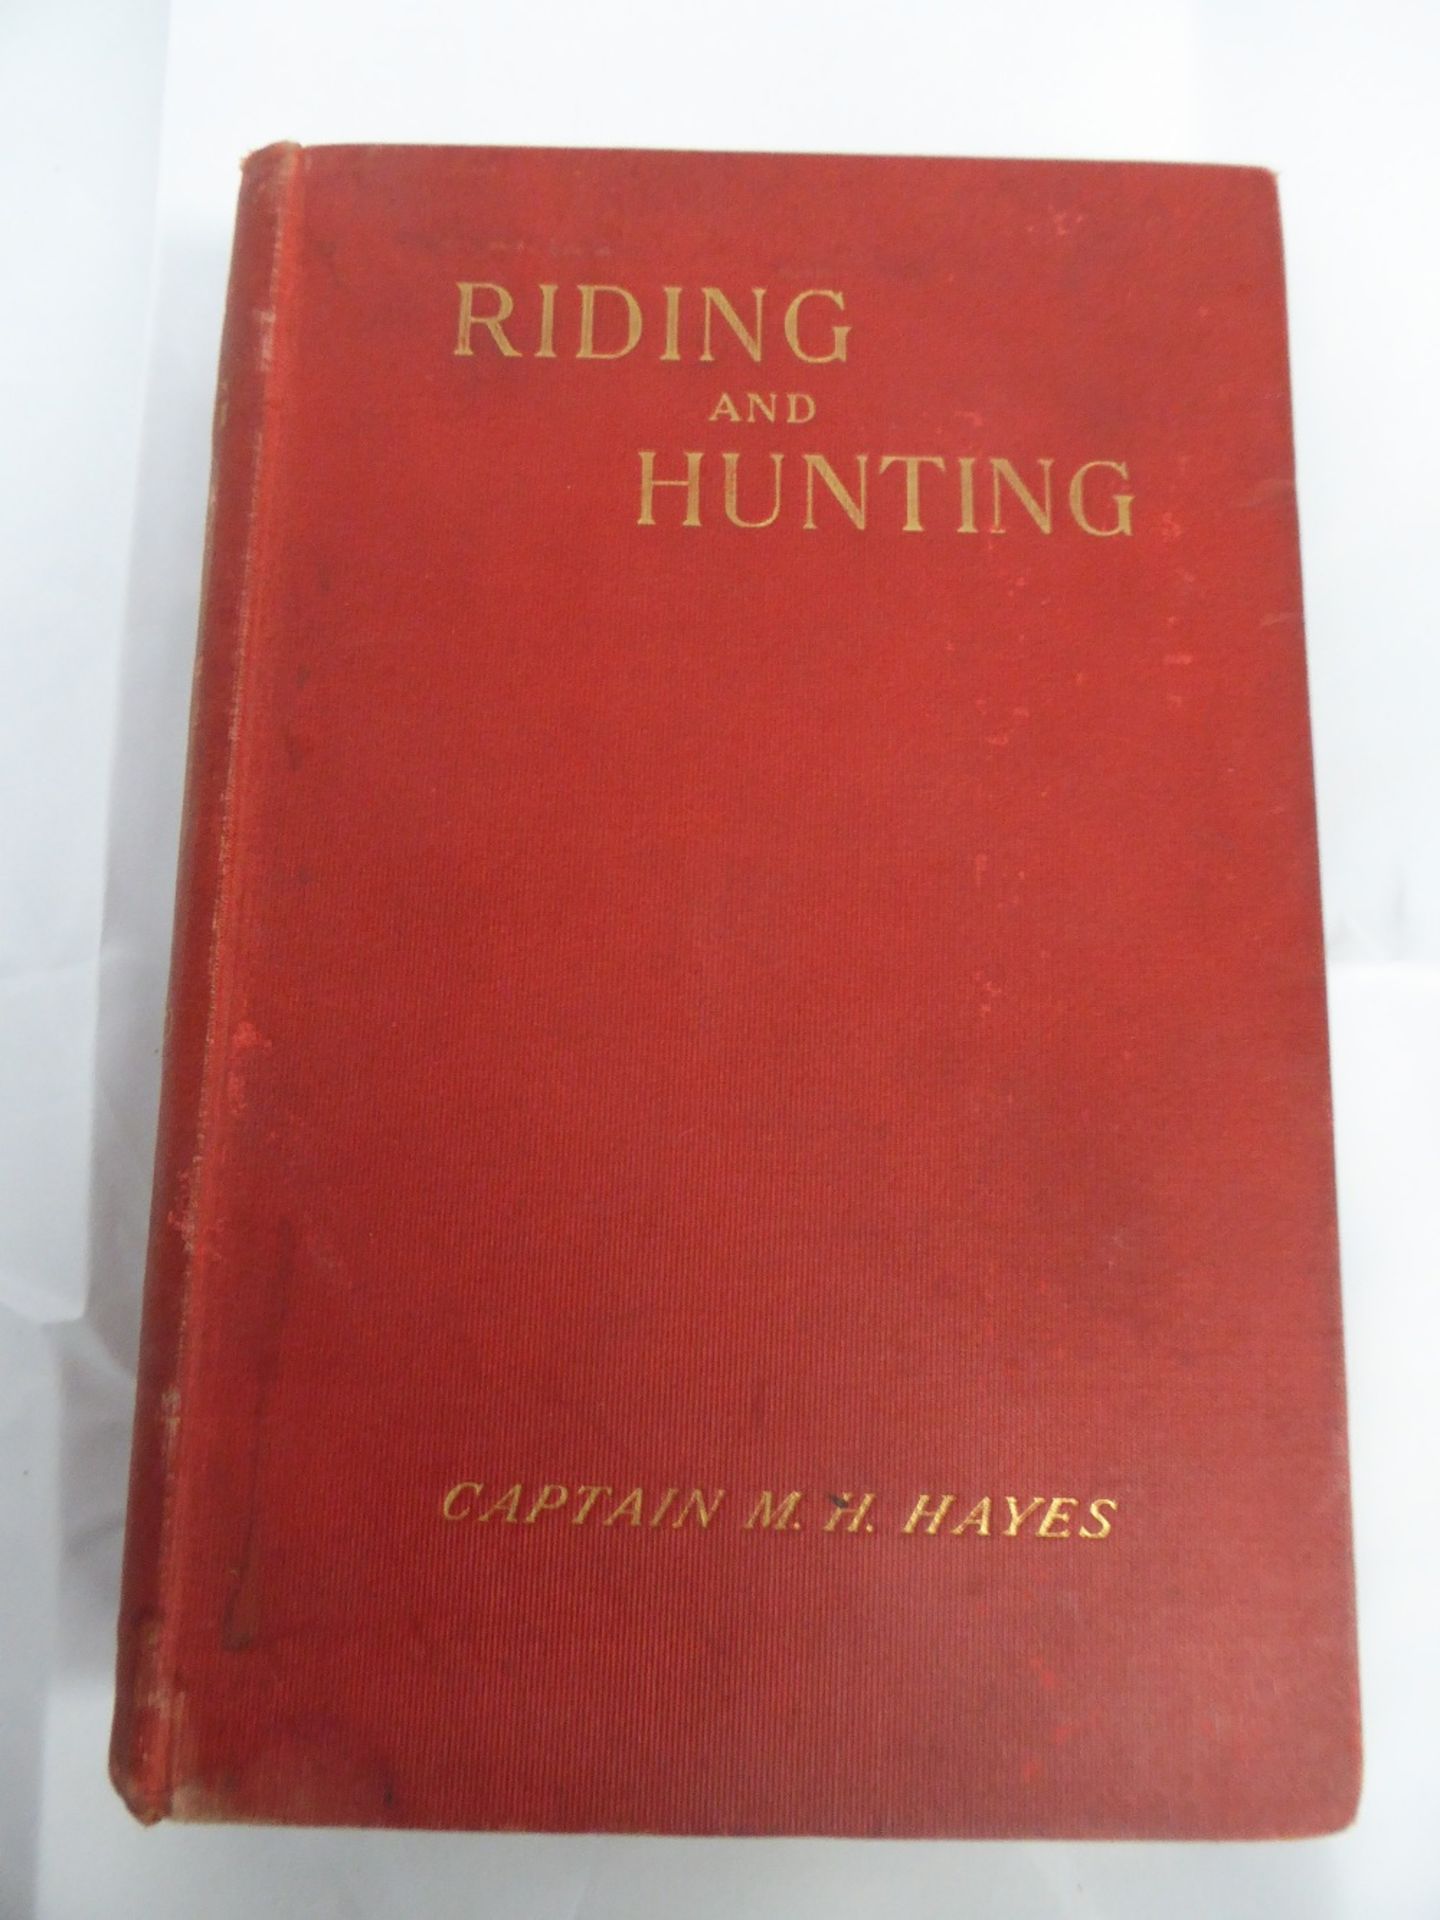 Riding and Hunting by Capt. M.H. Hayes FRCVS, 1901